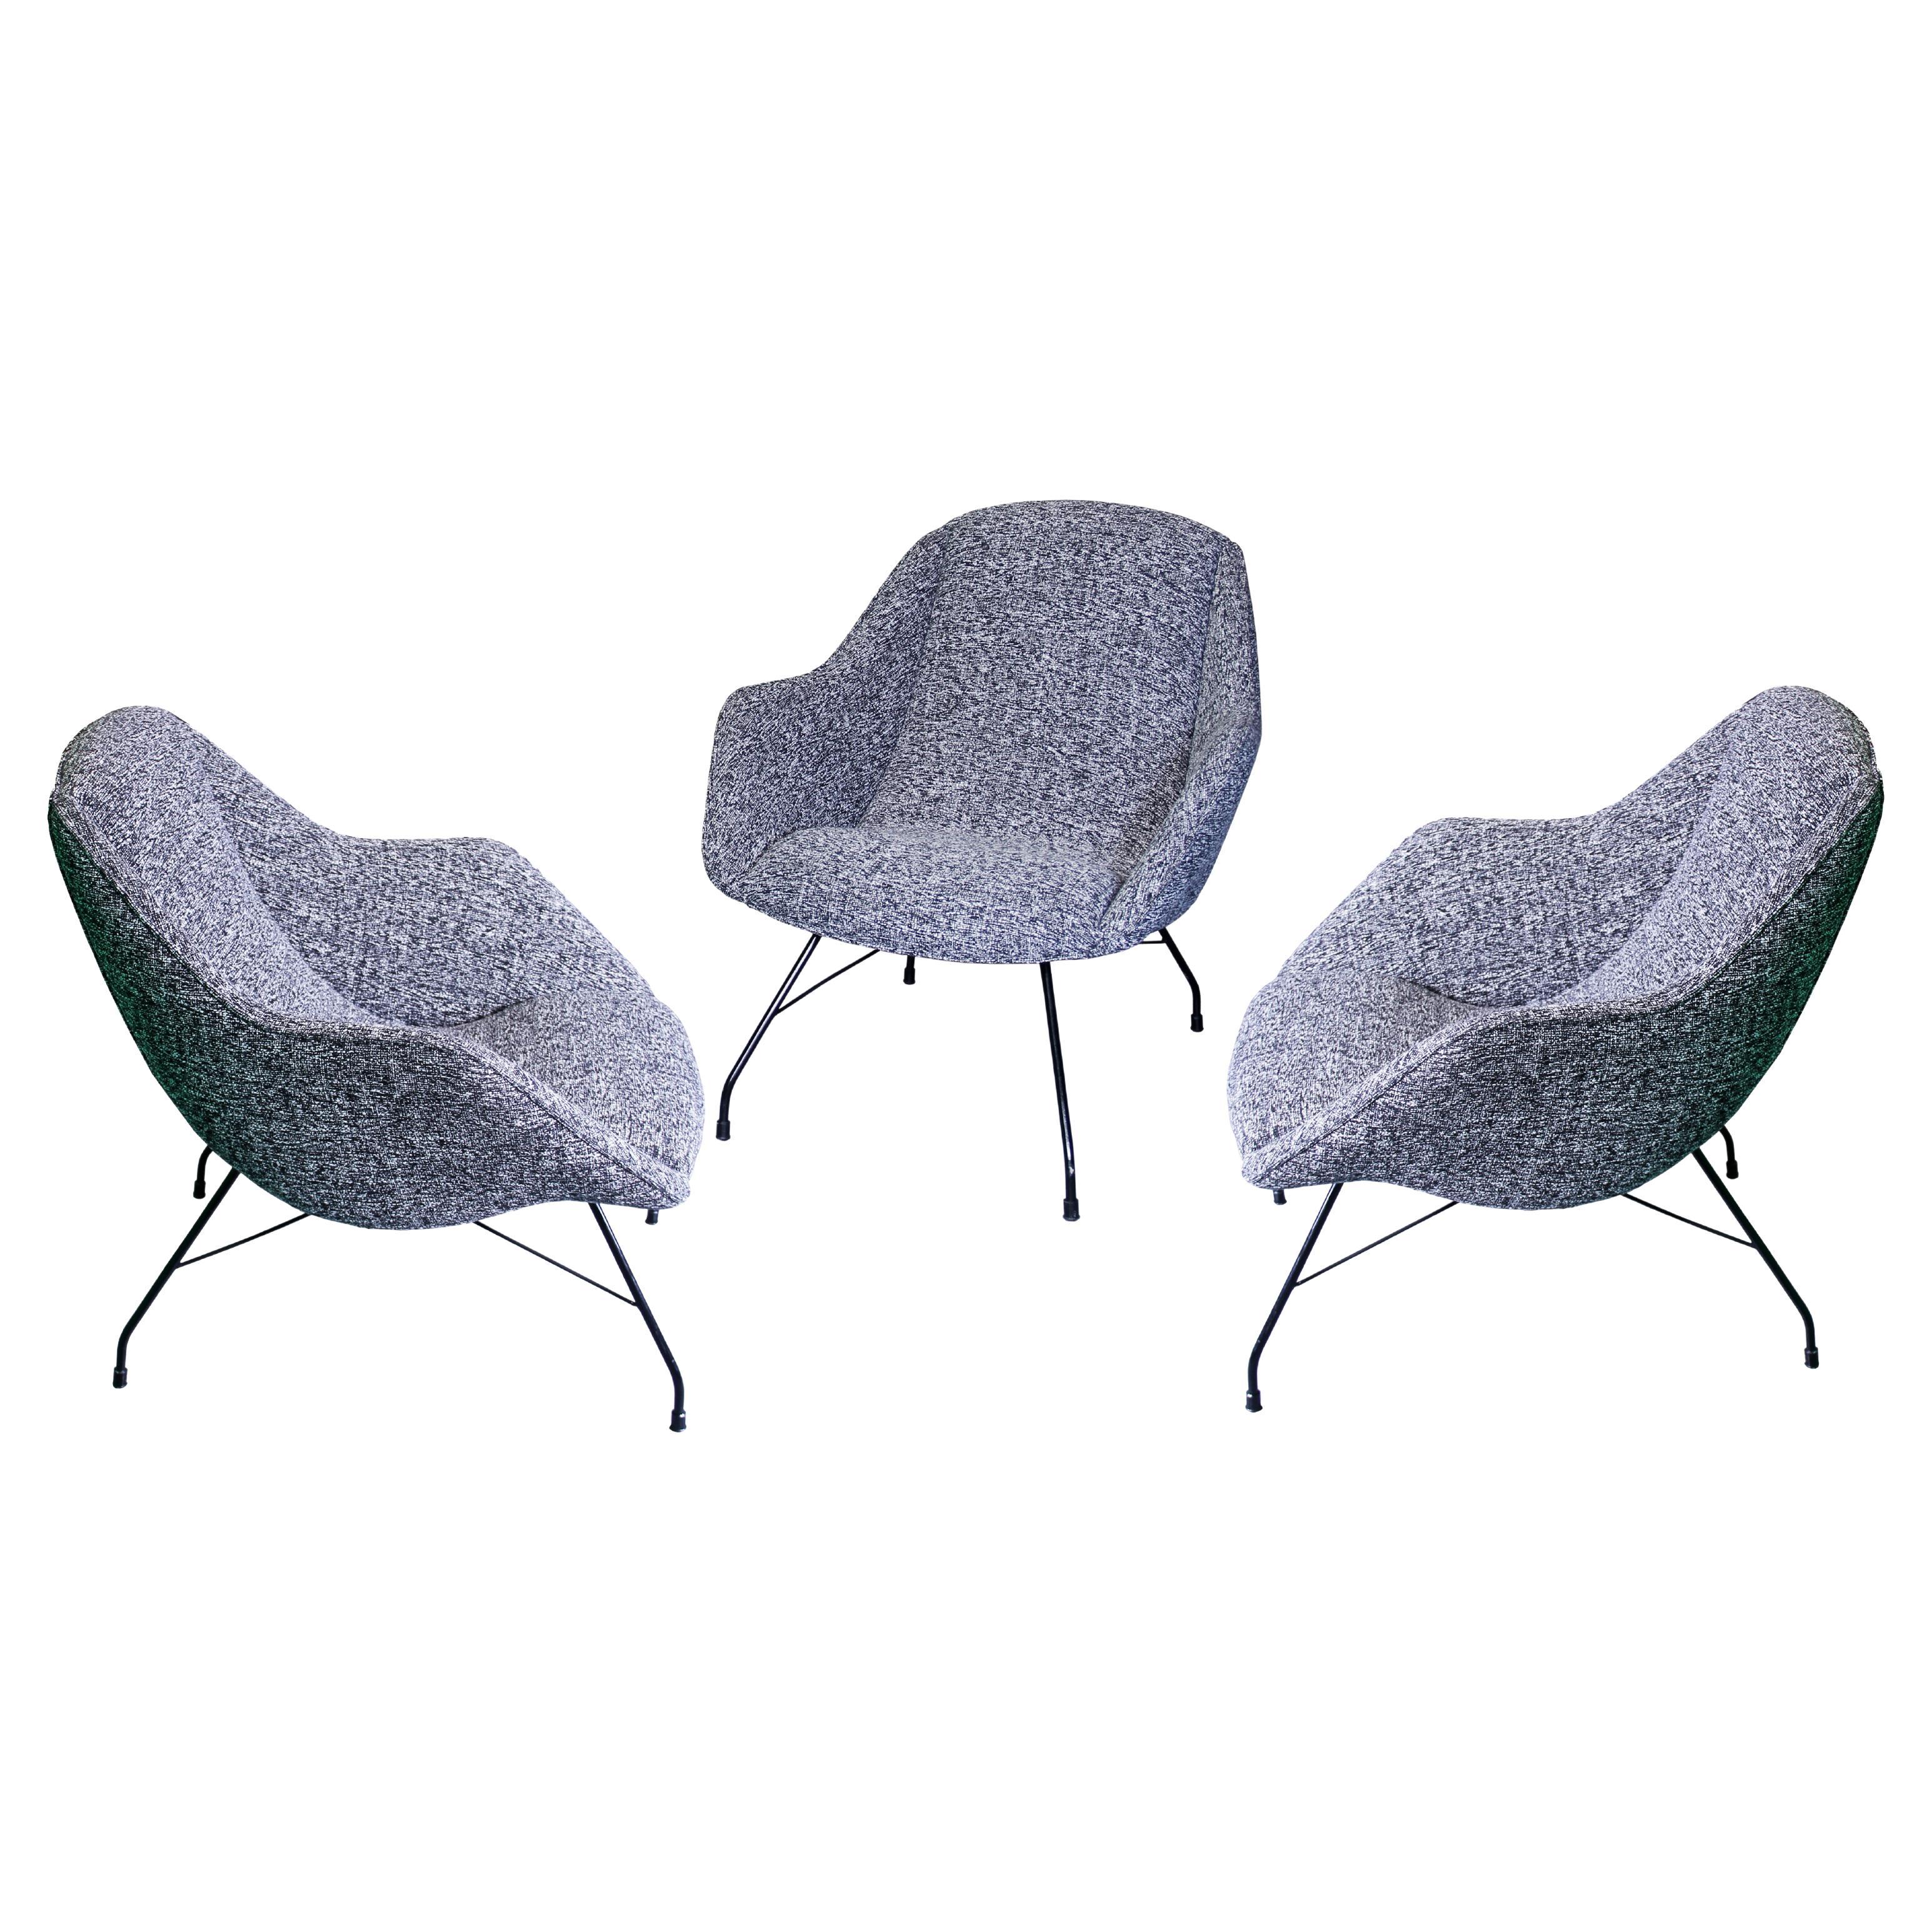 Three stunning original ‘Concha’ (shell) lounge chairs designed by Carlo Hauner and Martin Eisler, manufactured by Forma Moveis, Brazil, 1960s. 
These chairs have a solid steel structure painted black, and shell seat newly upholstered completely by